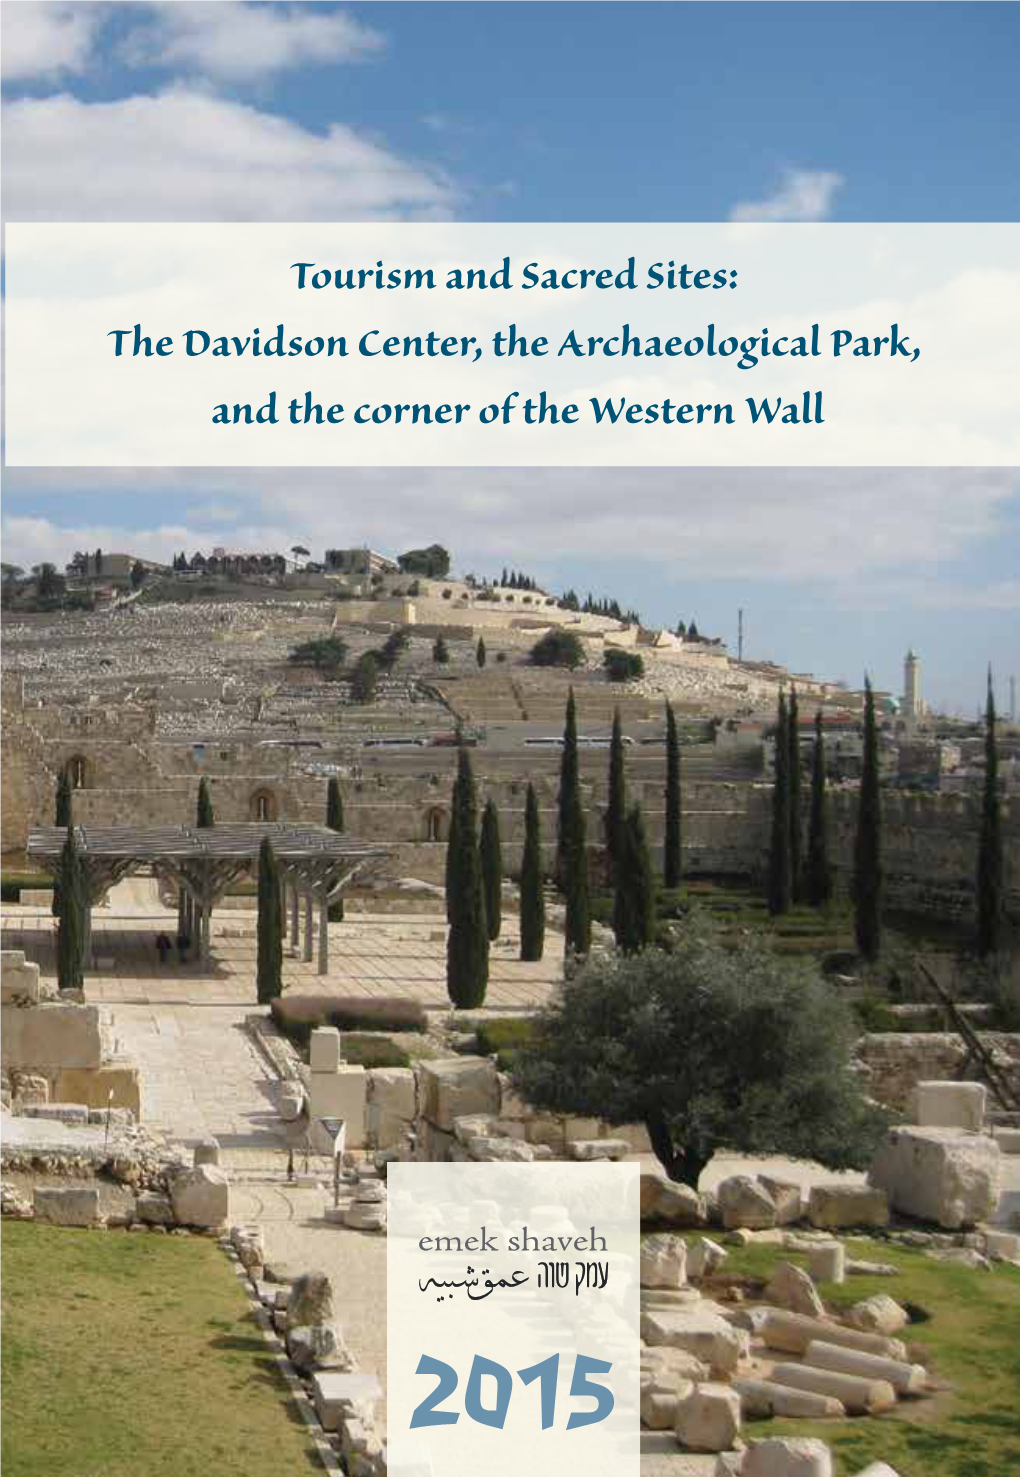 The Davidson Center, the Archaeological Park, and the Corner of the Western Wall